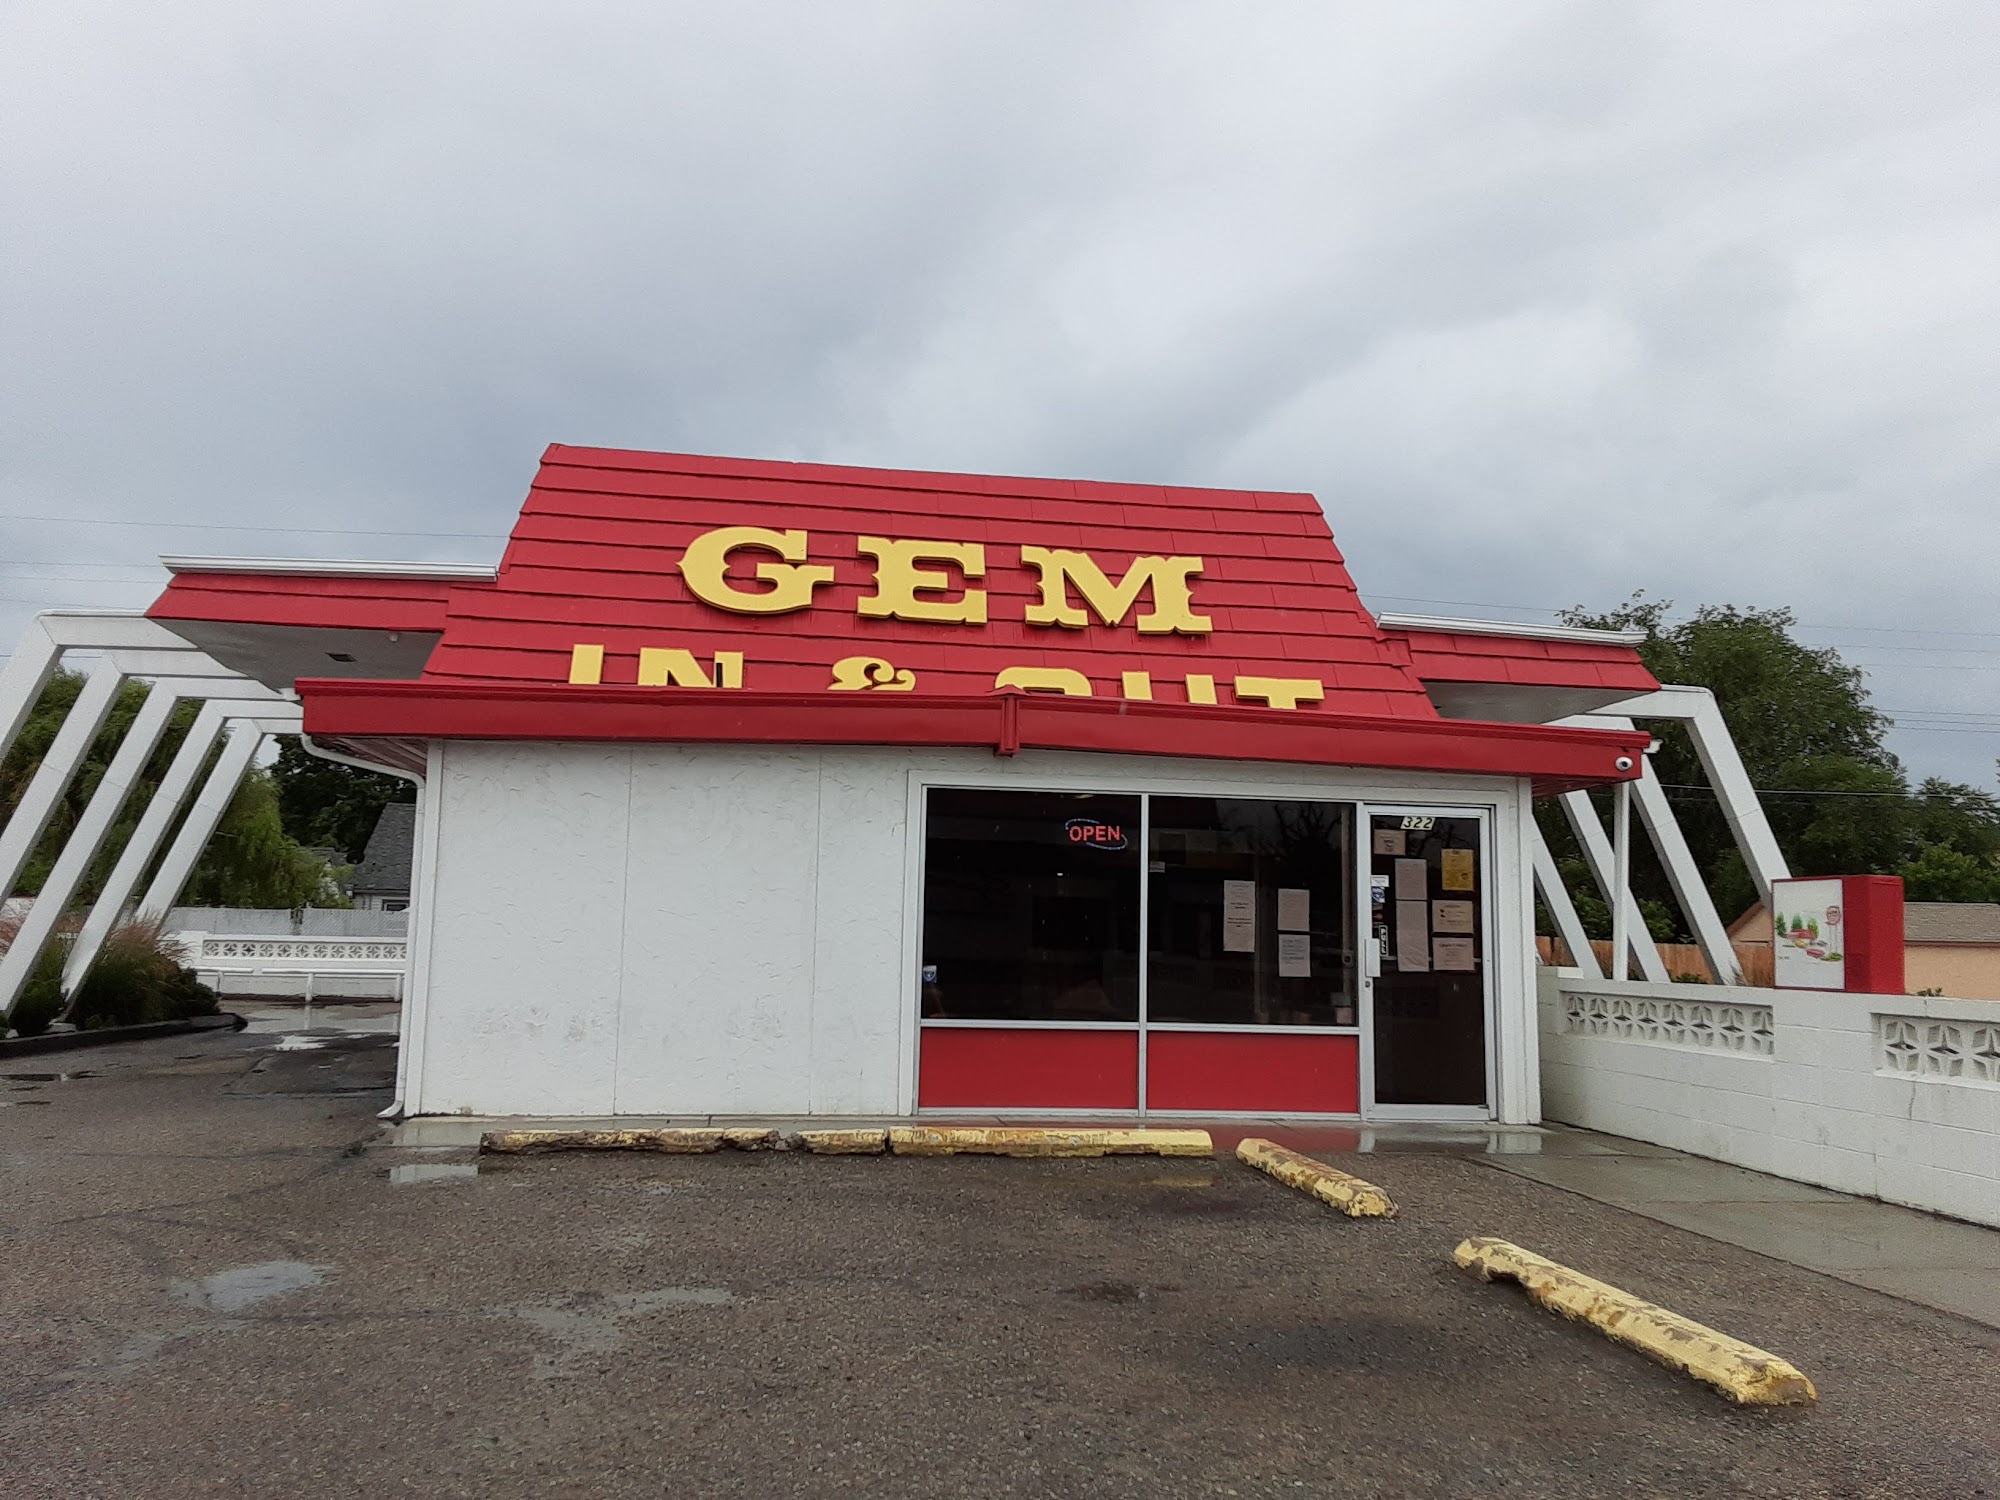 Gem In & Out